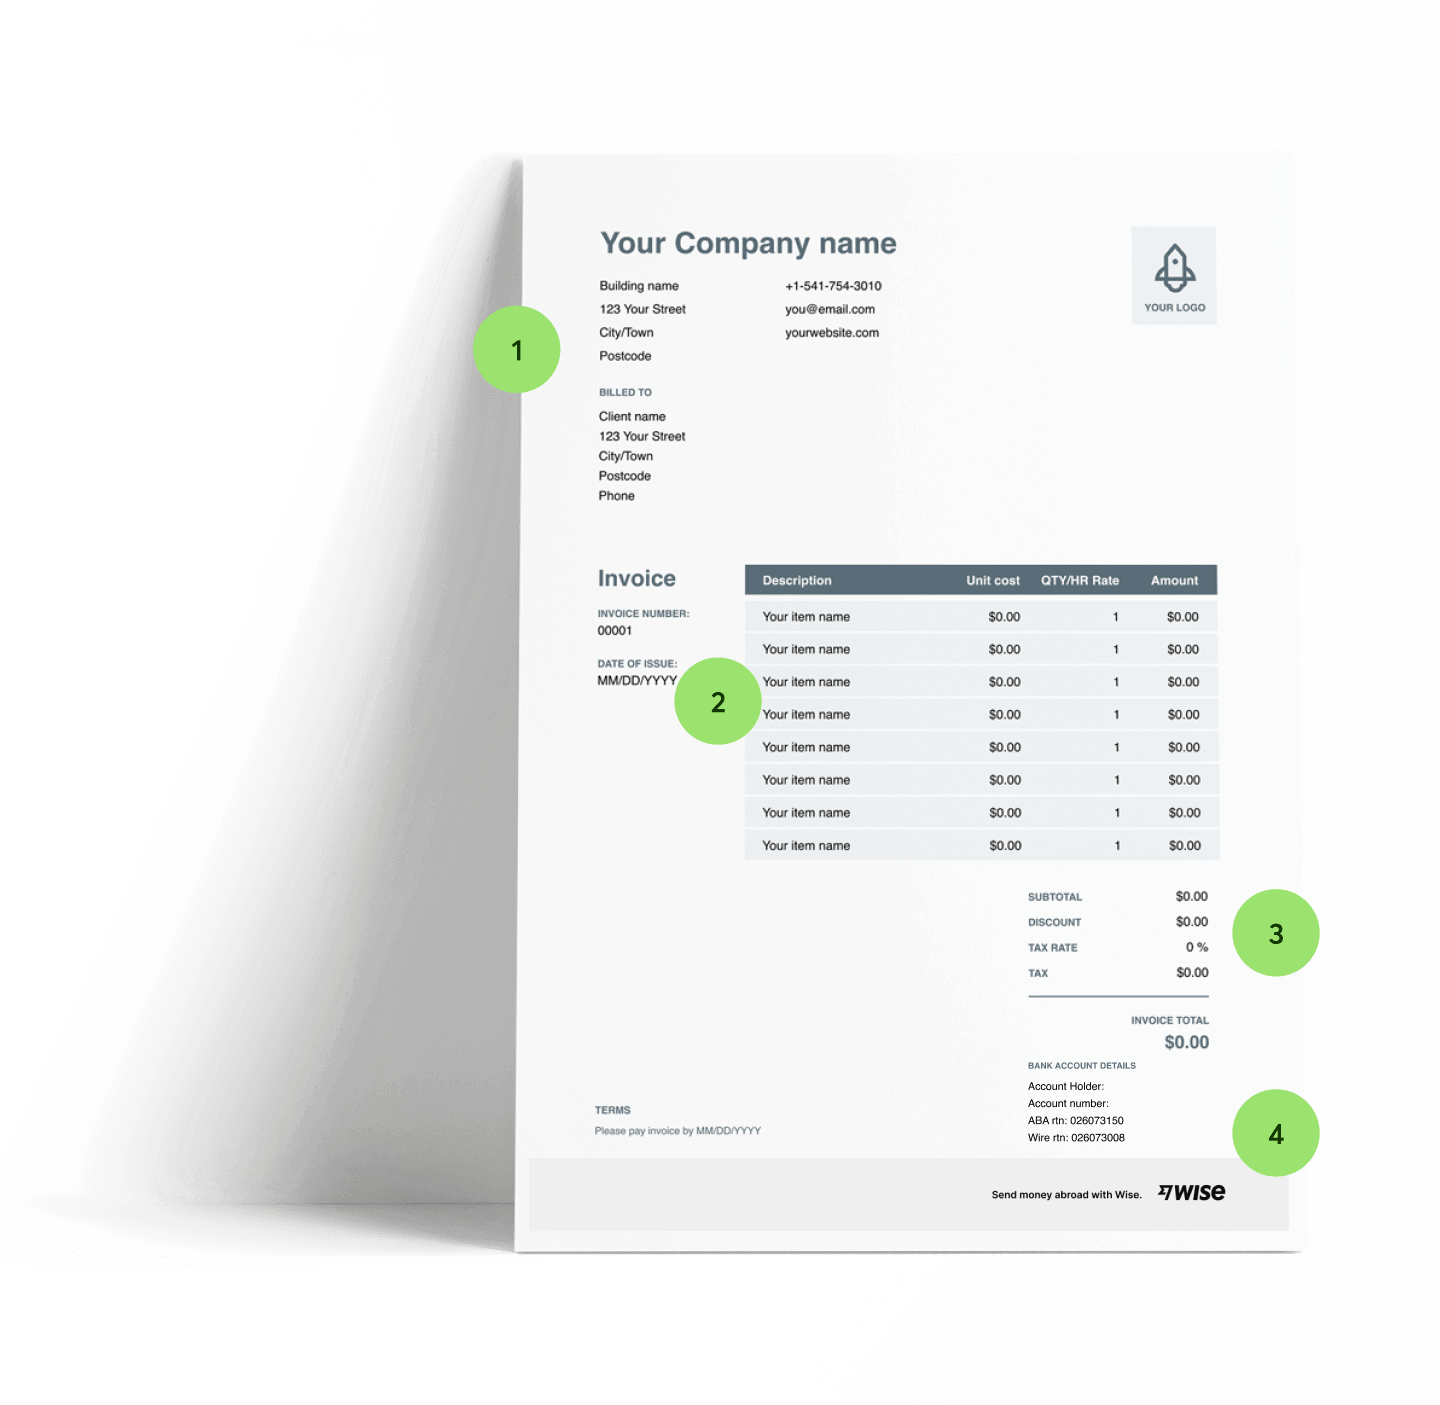 How to write a freelance invoice?